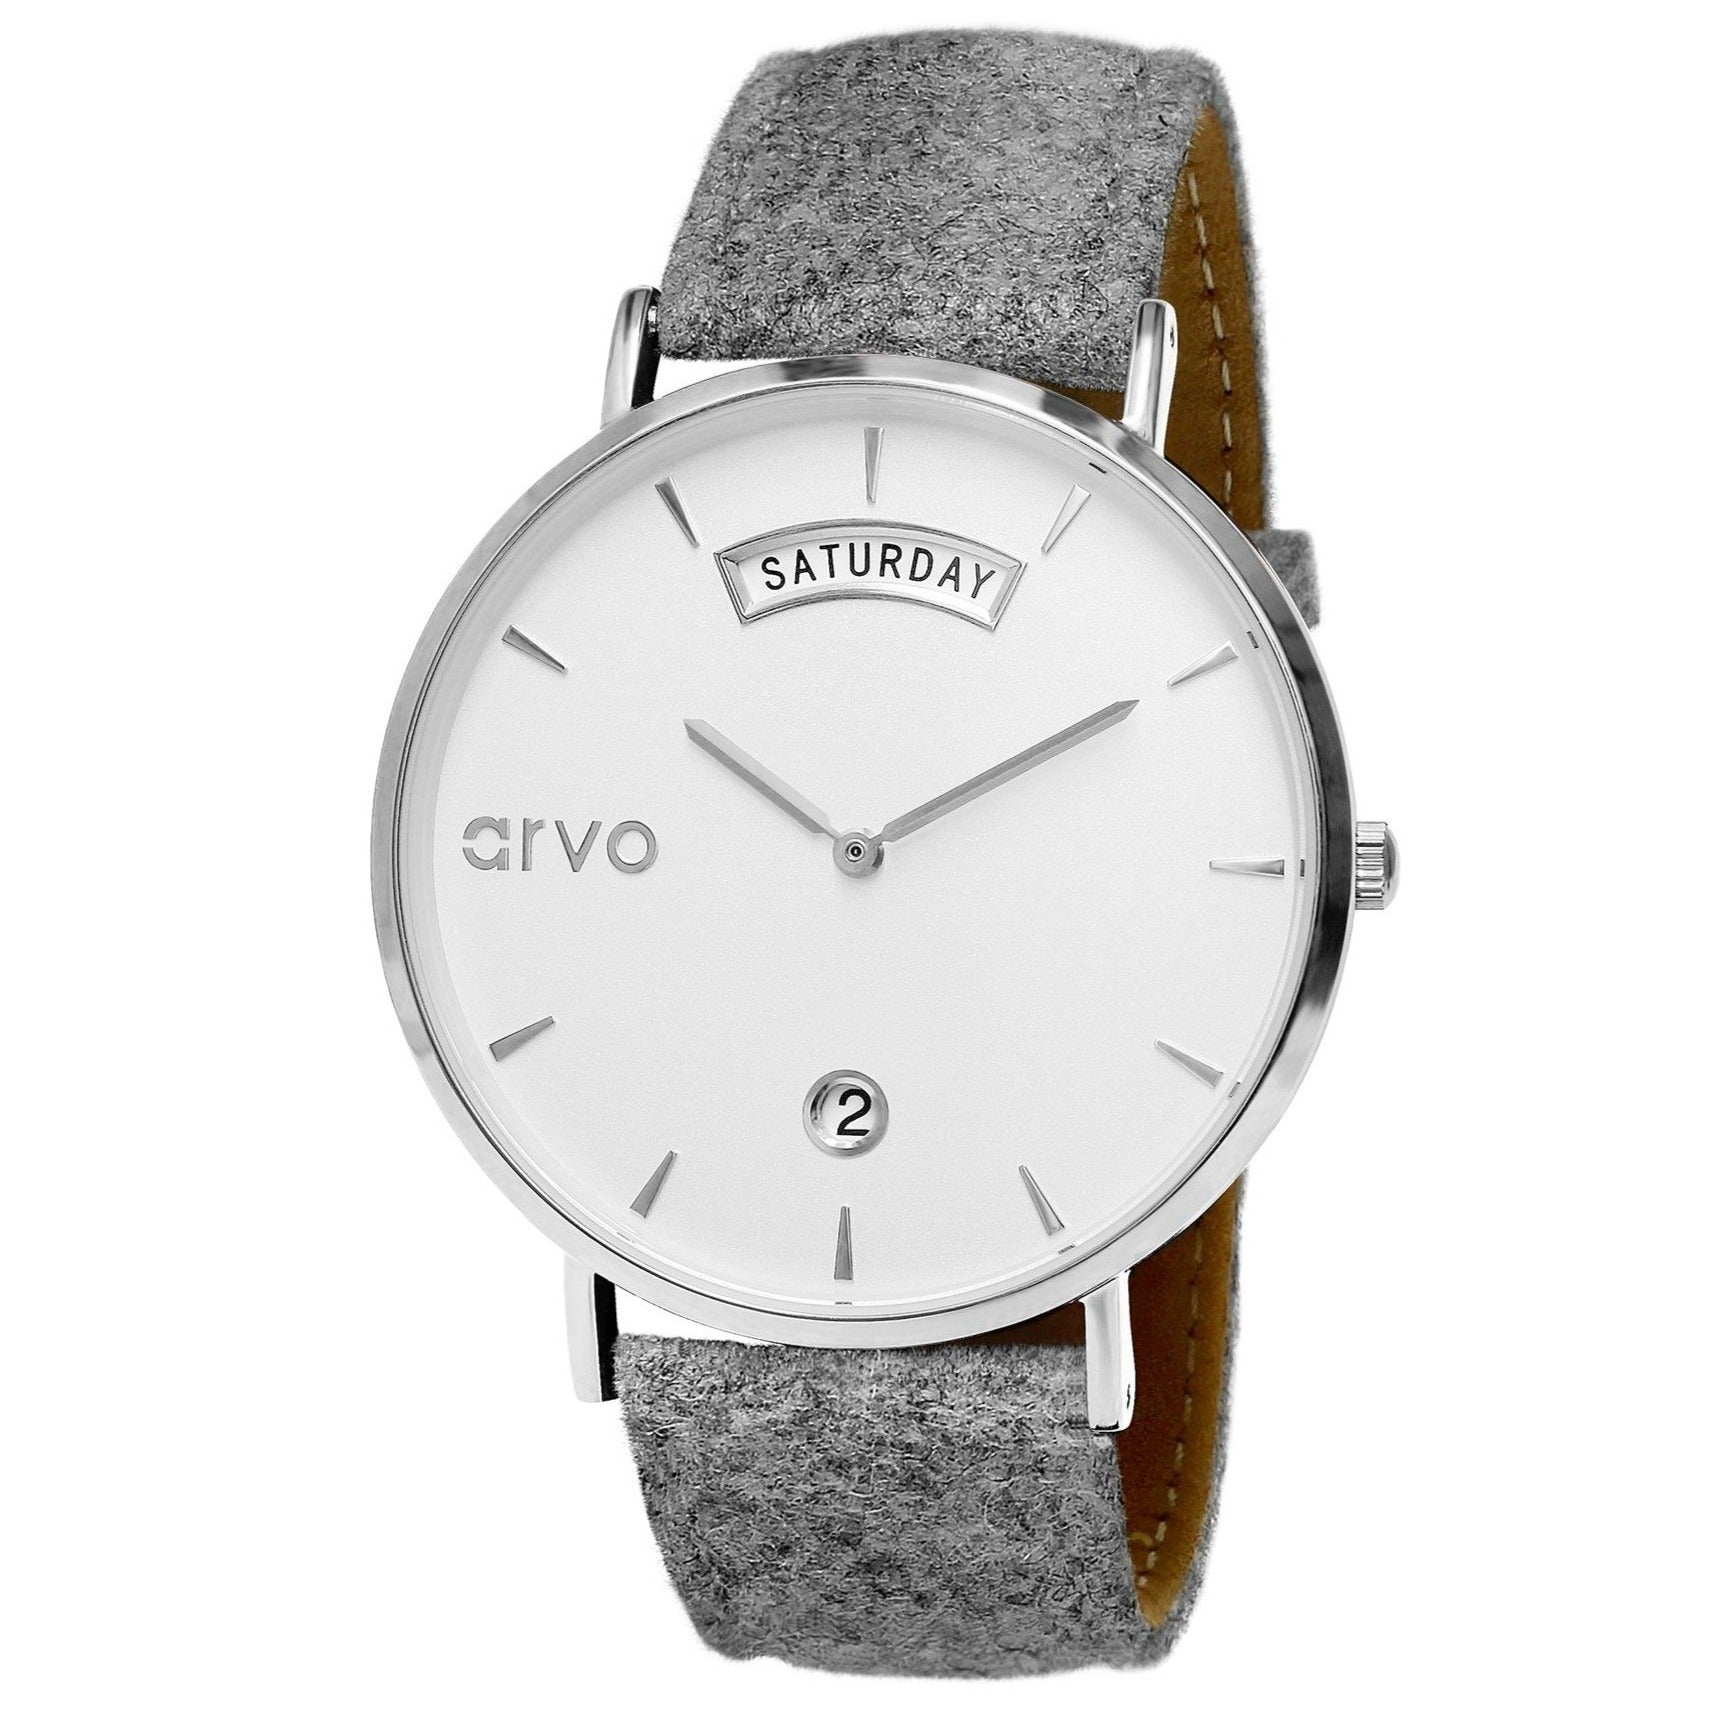 Arvo Awristacrat Silver classic watches for men and women with gray felt watch band